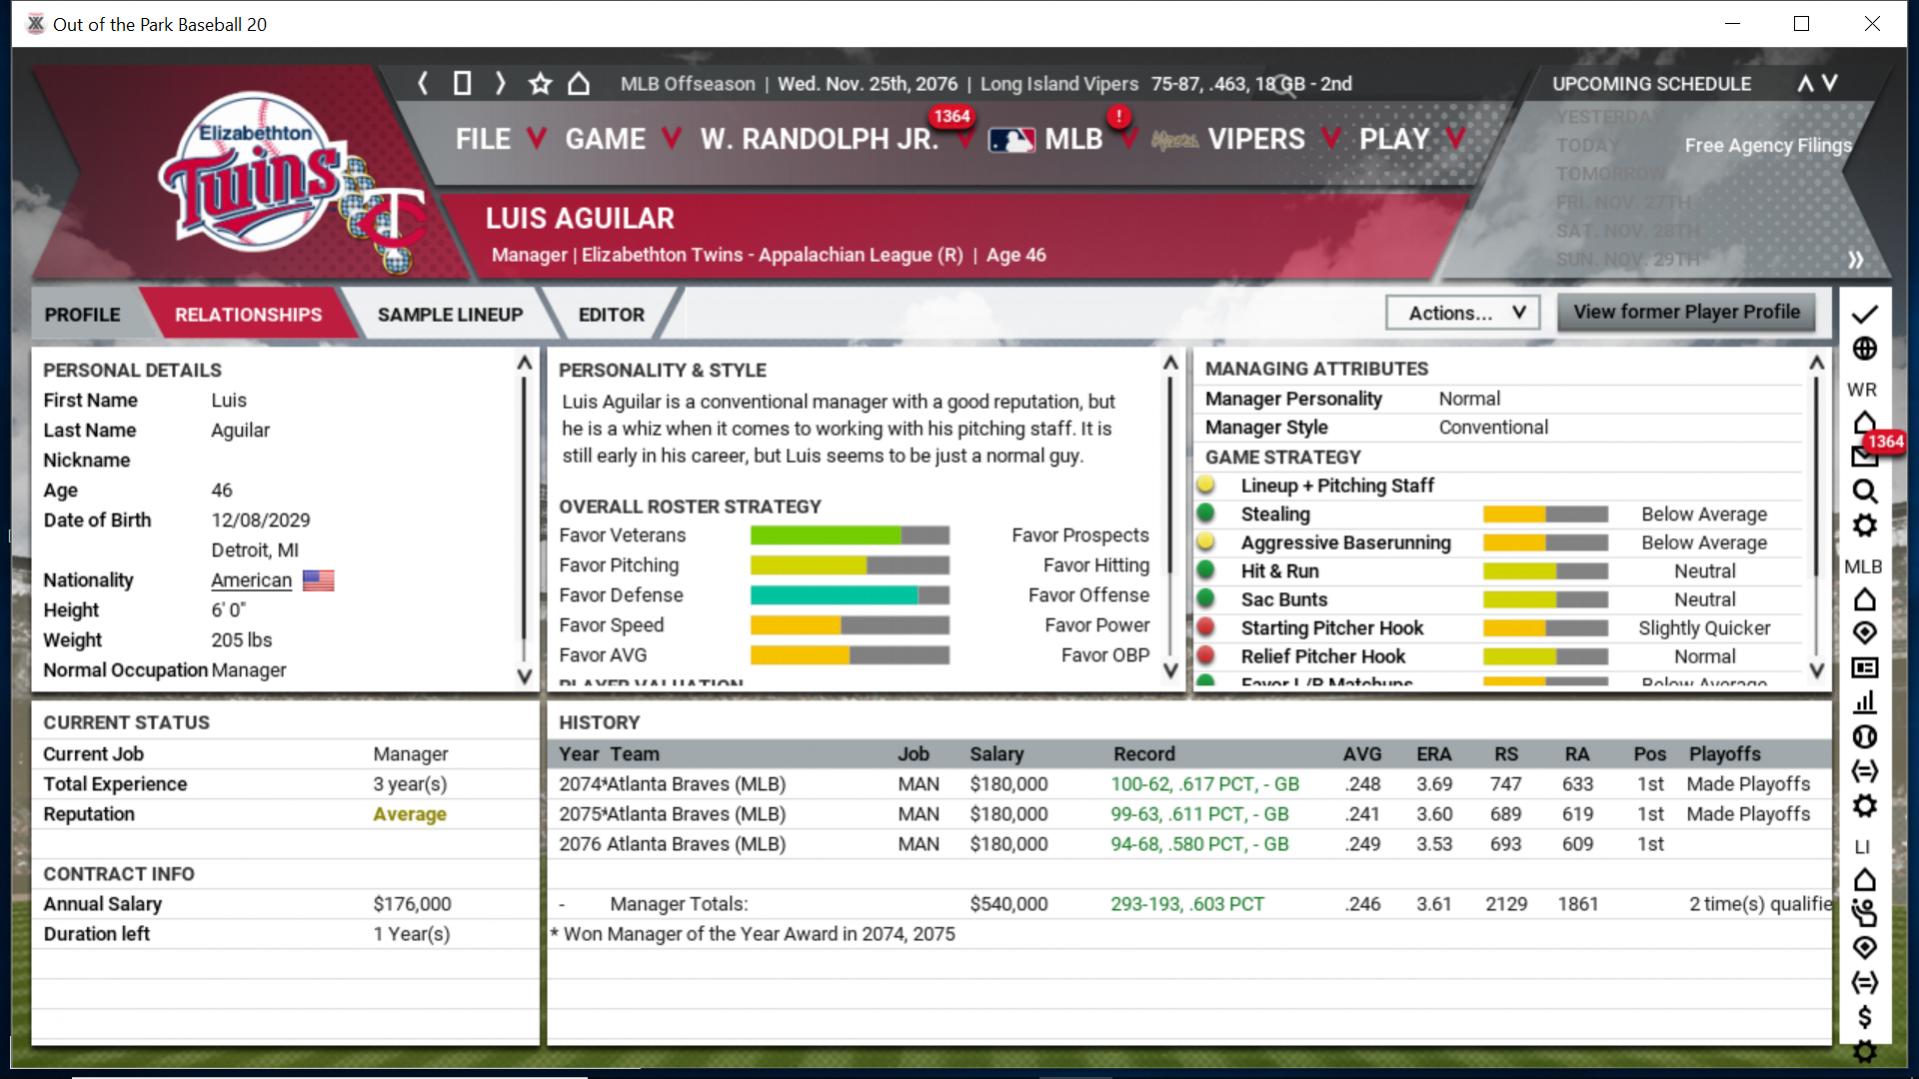 What's the story with this manager? - OOTP Developments Forums